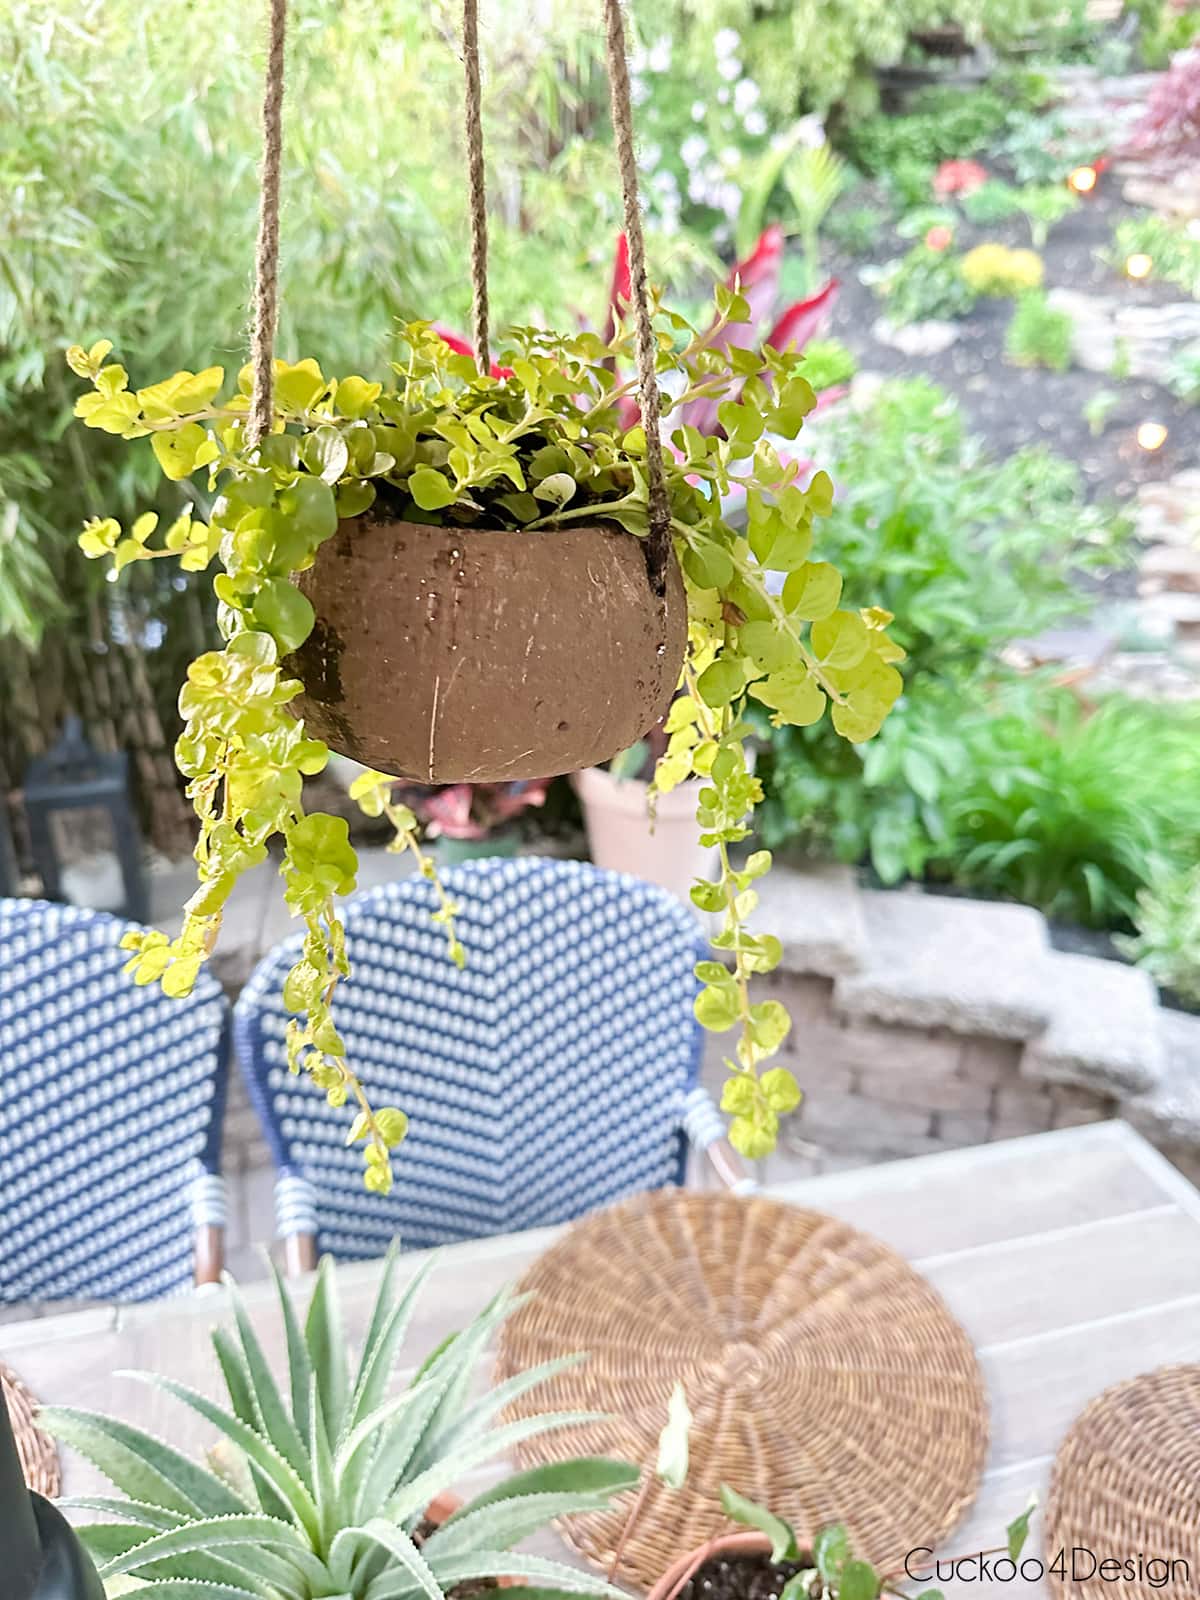 coconut shell planter with plant inside